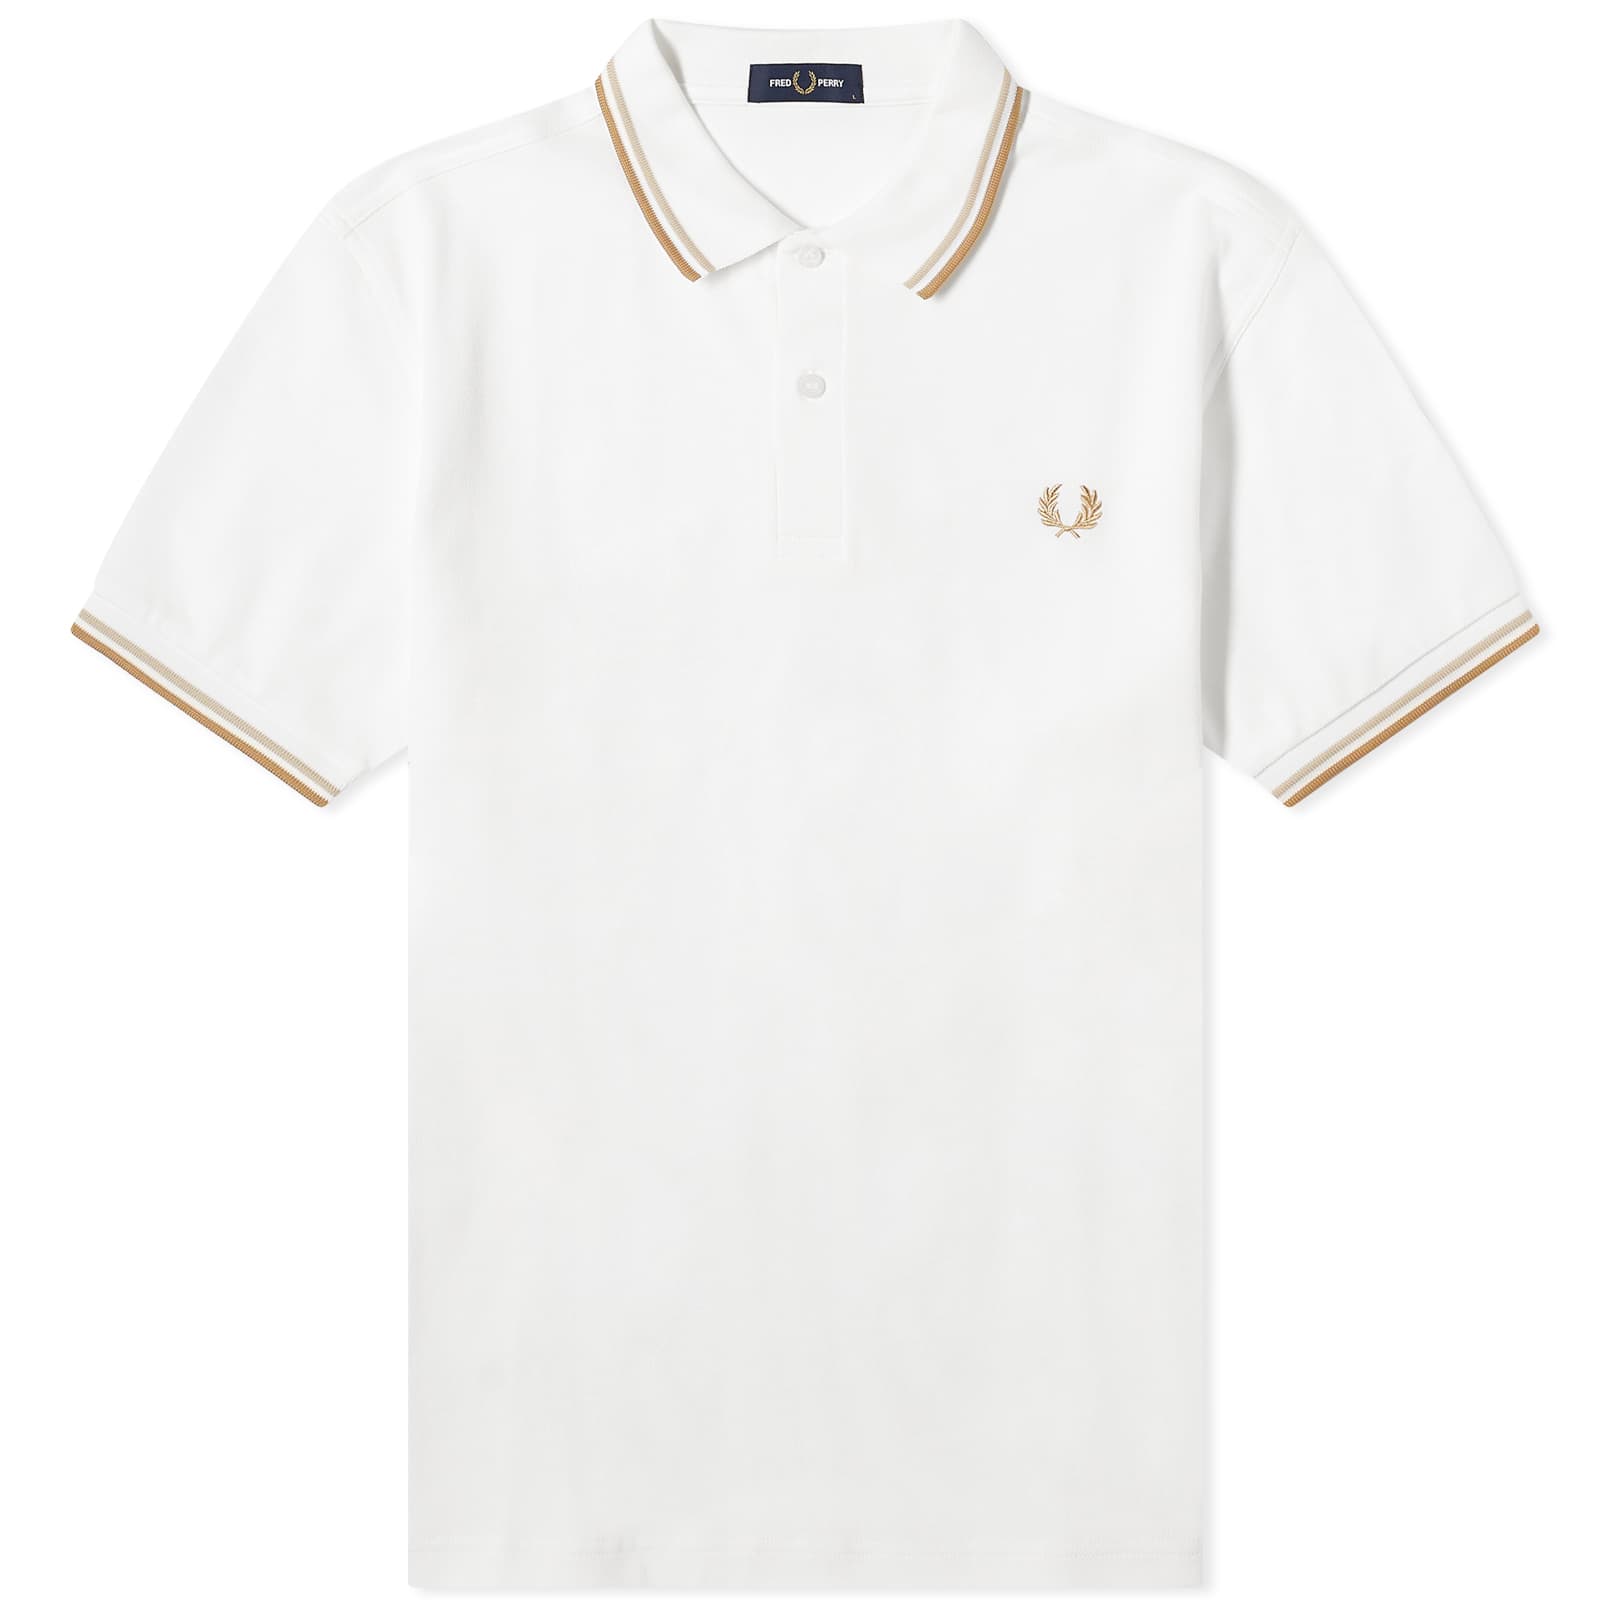 Поло Fred Perry Twin Tipped, цвет Snow, Oat & Stone футболка поло fred perry twin tipped белый